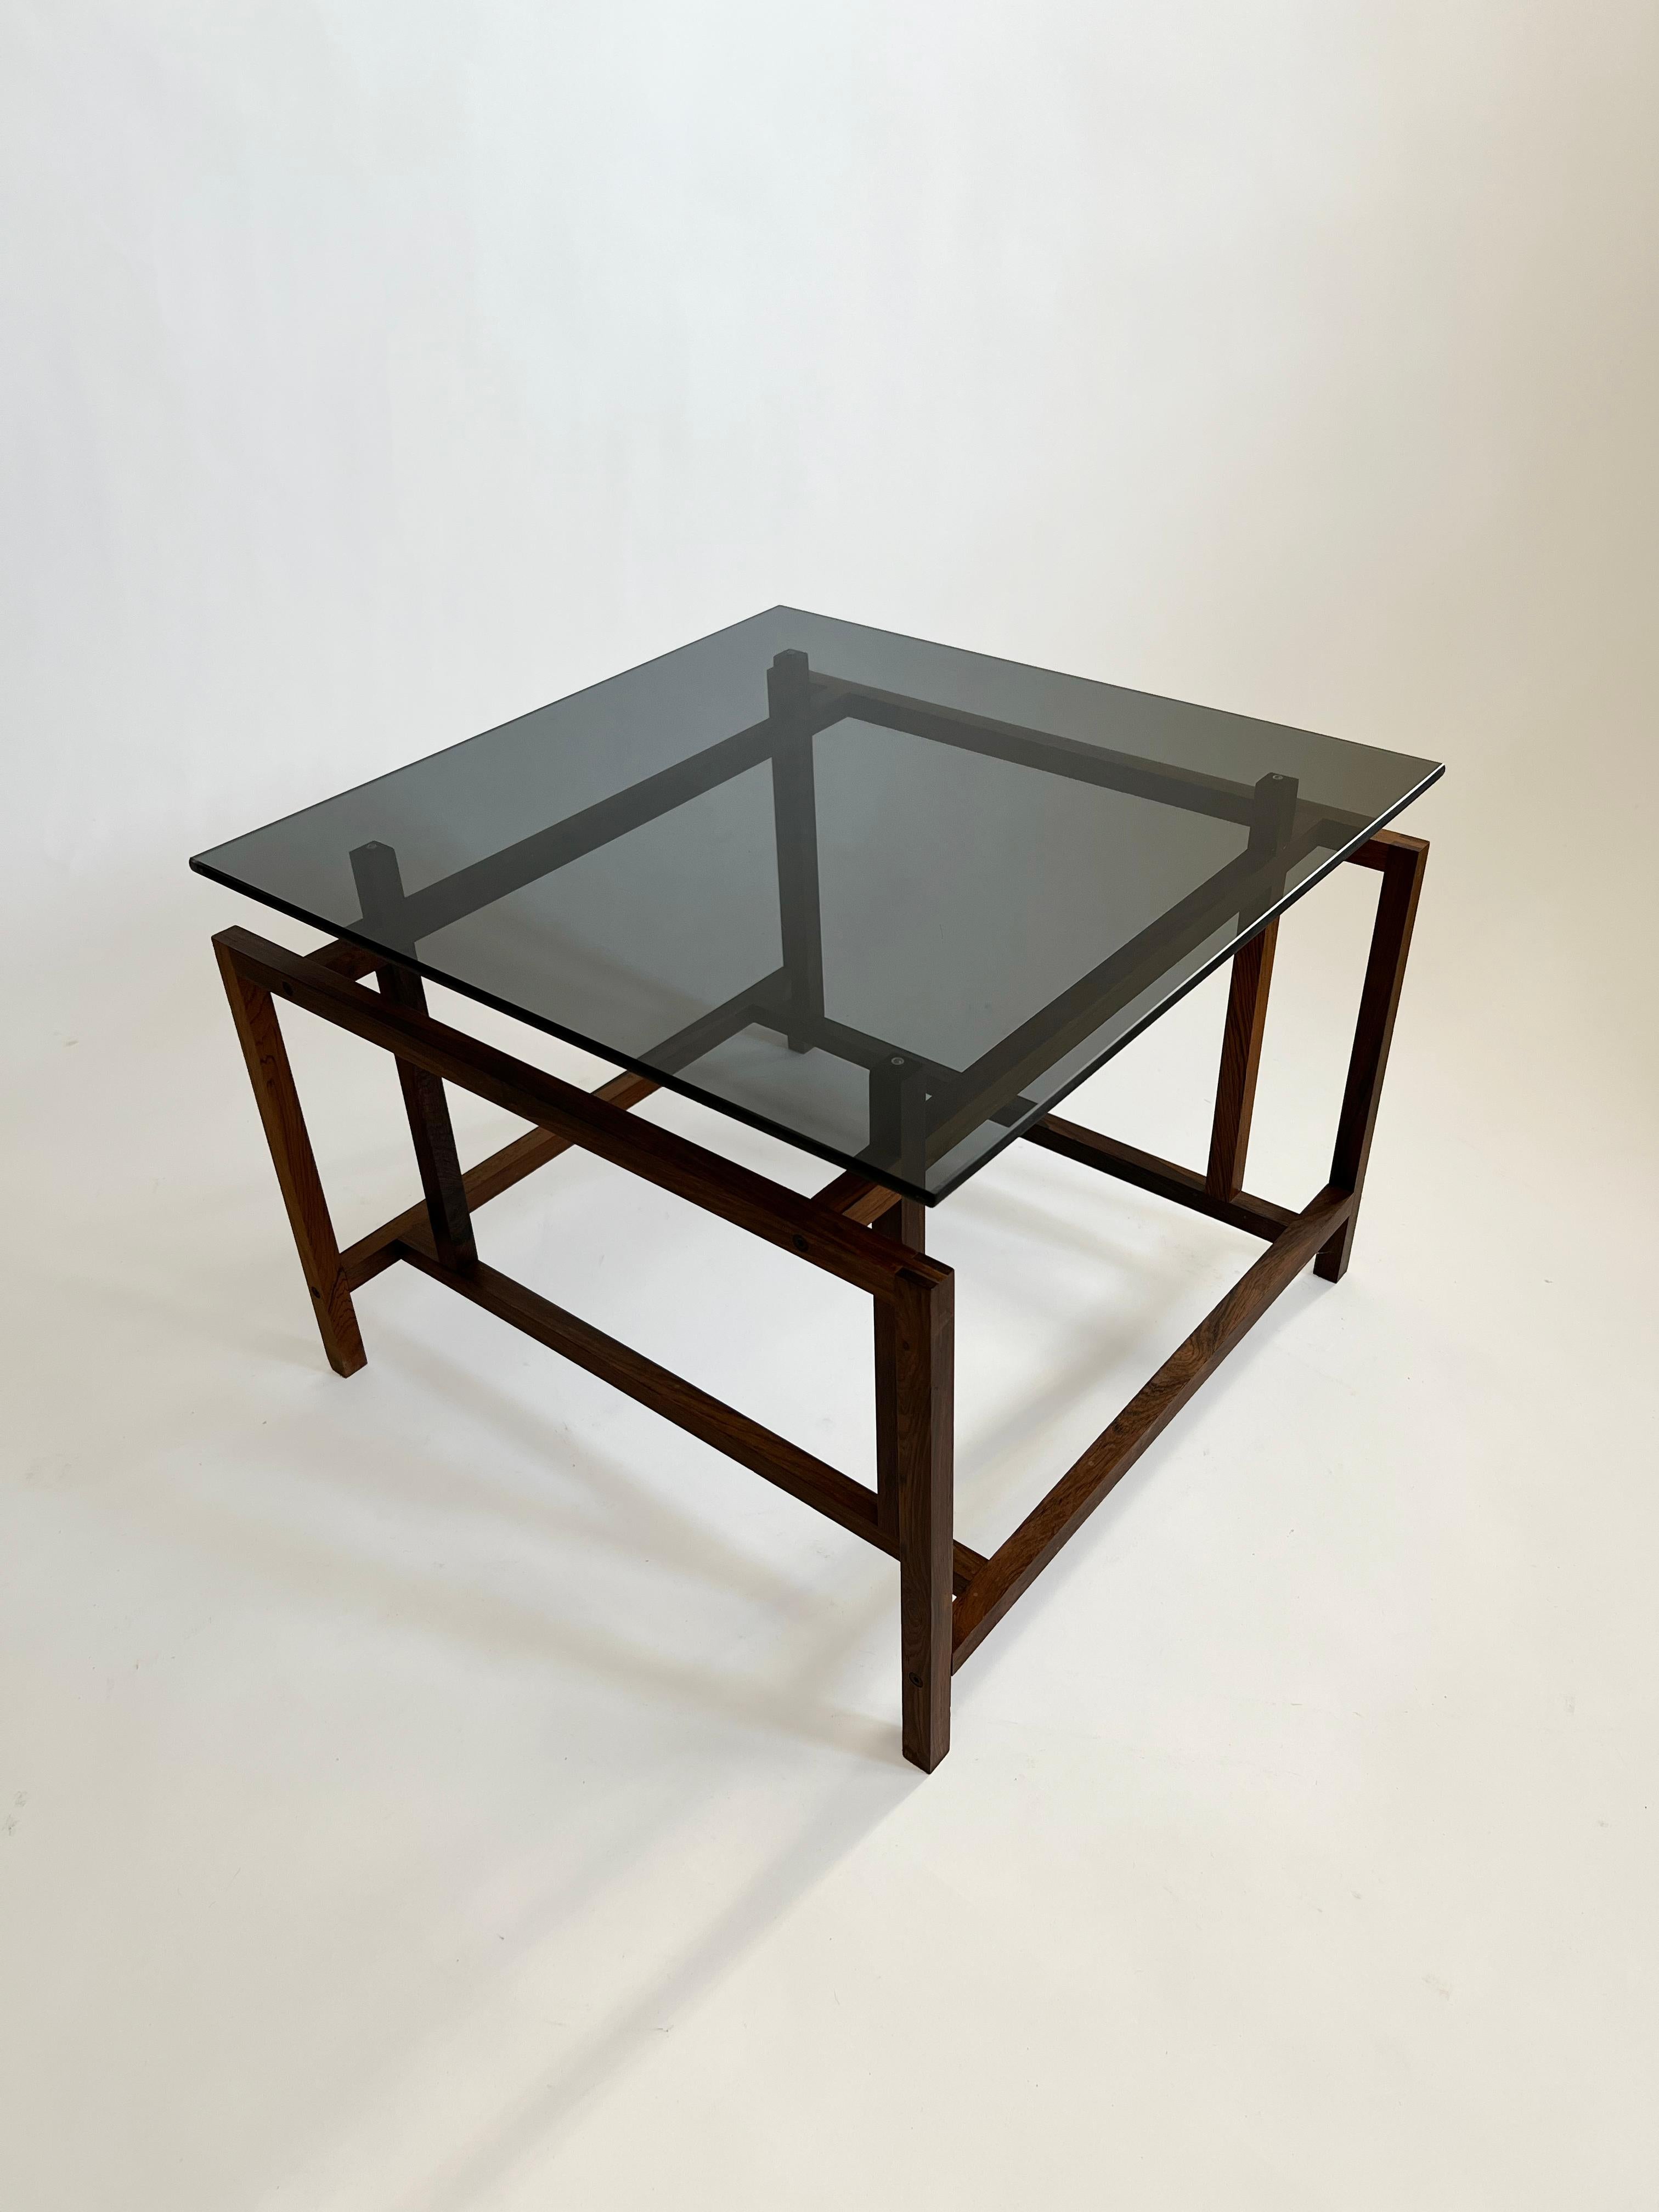 Rosewood and glass side table by Henning Norgaard for Komfort, made in Denmark in the 60s. The glass is 6mm thick and held in place with wood pins that fit into recesses in the glass.